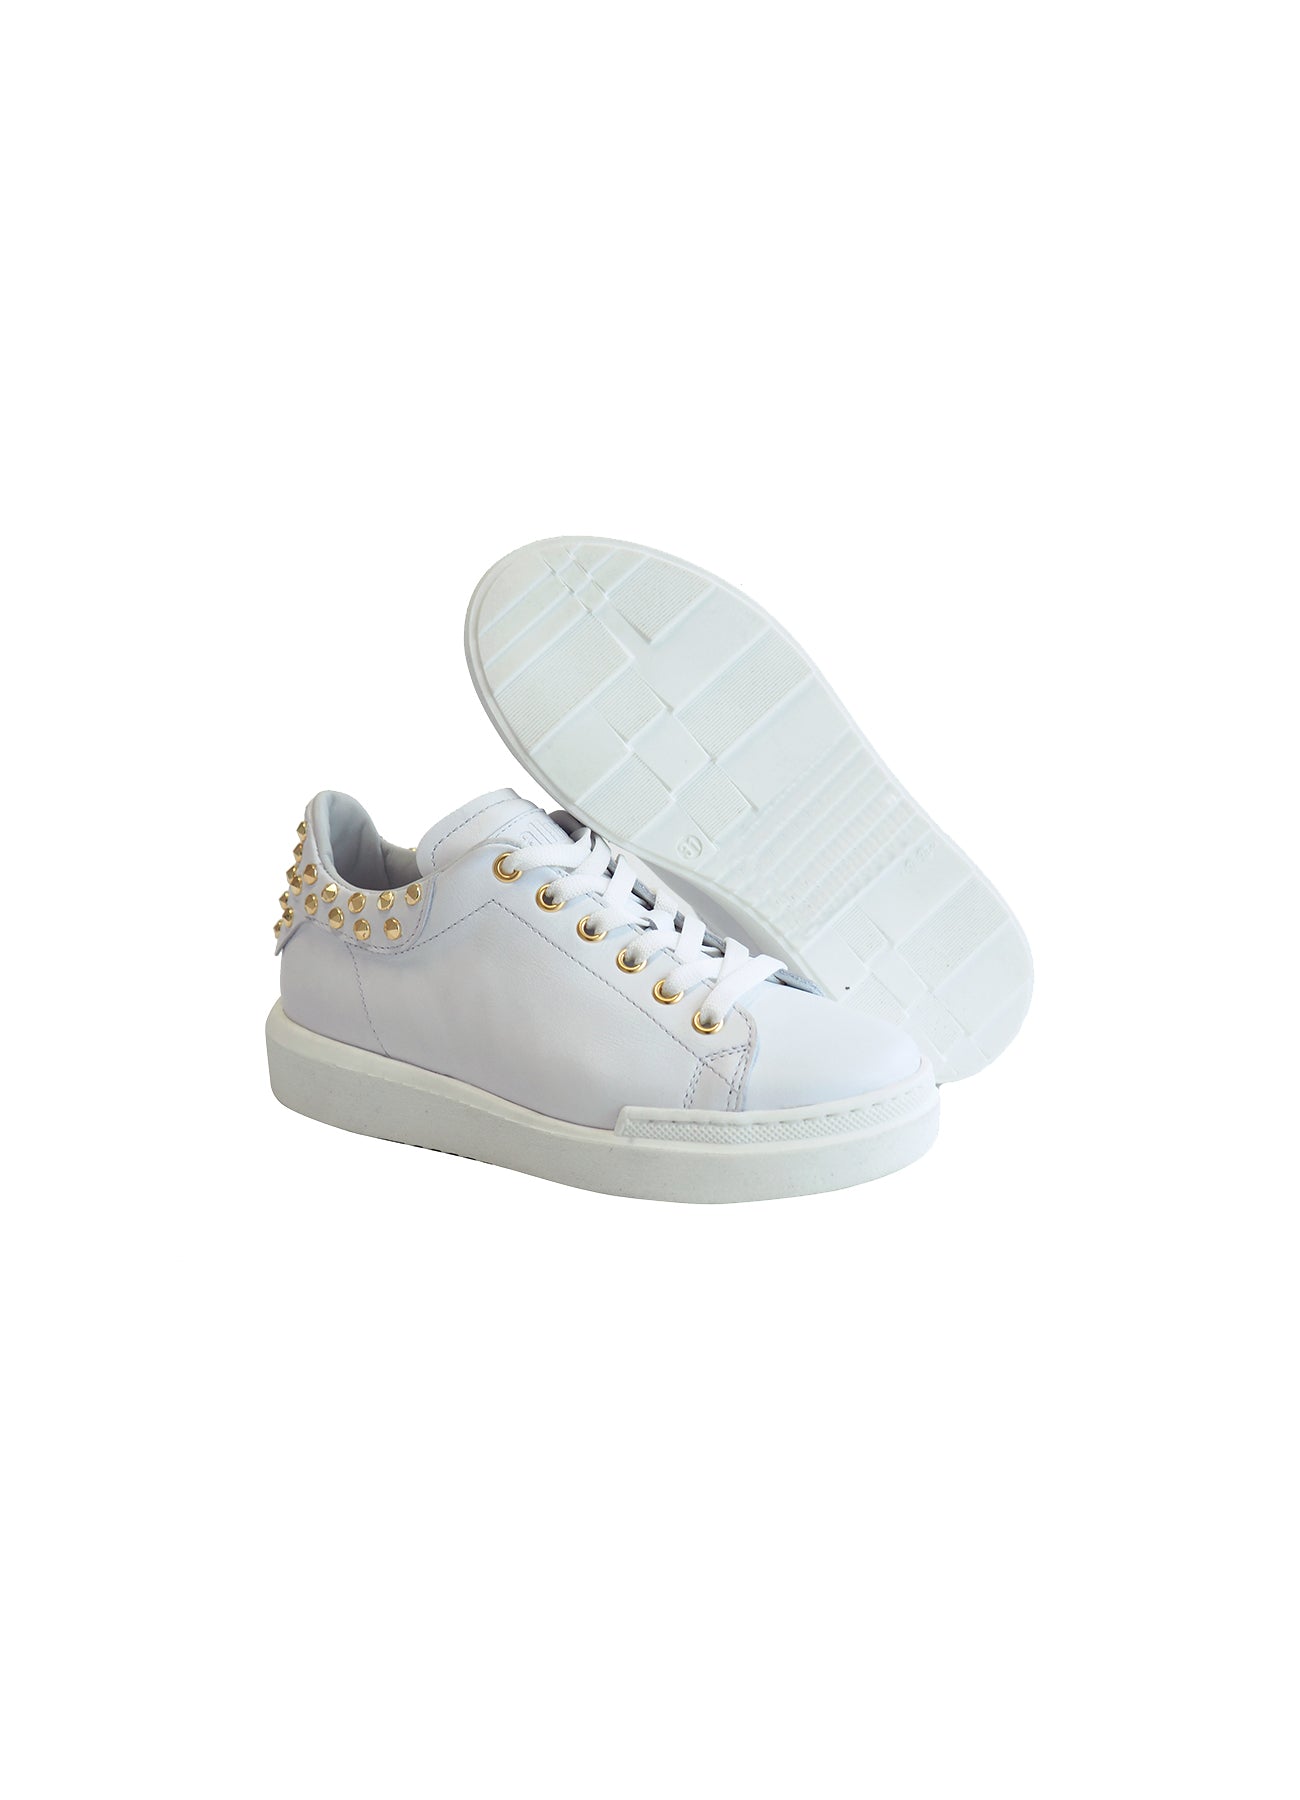 white sneakers with gold studs